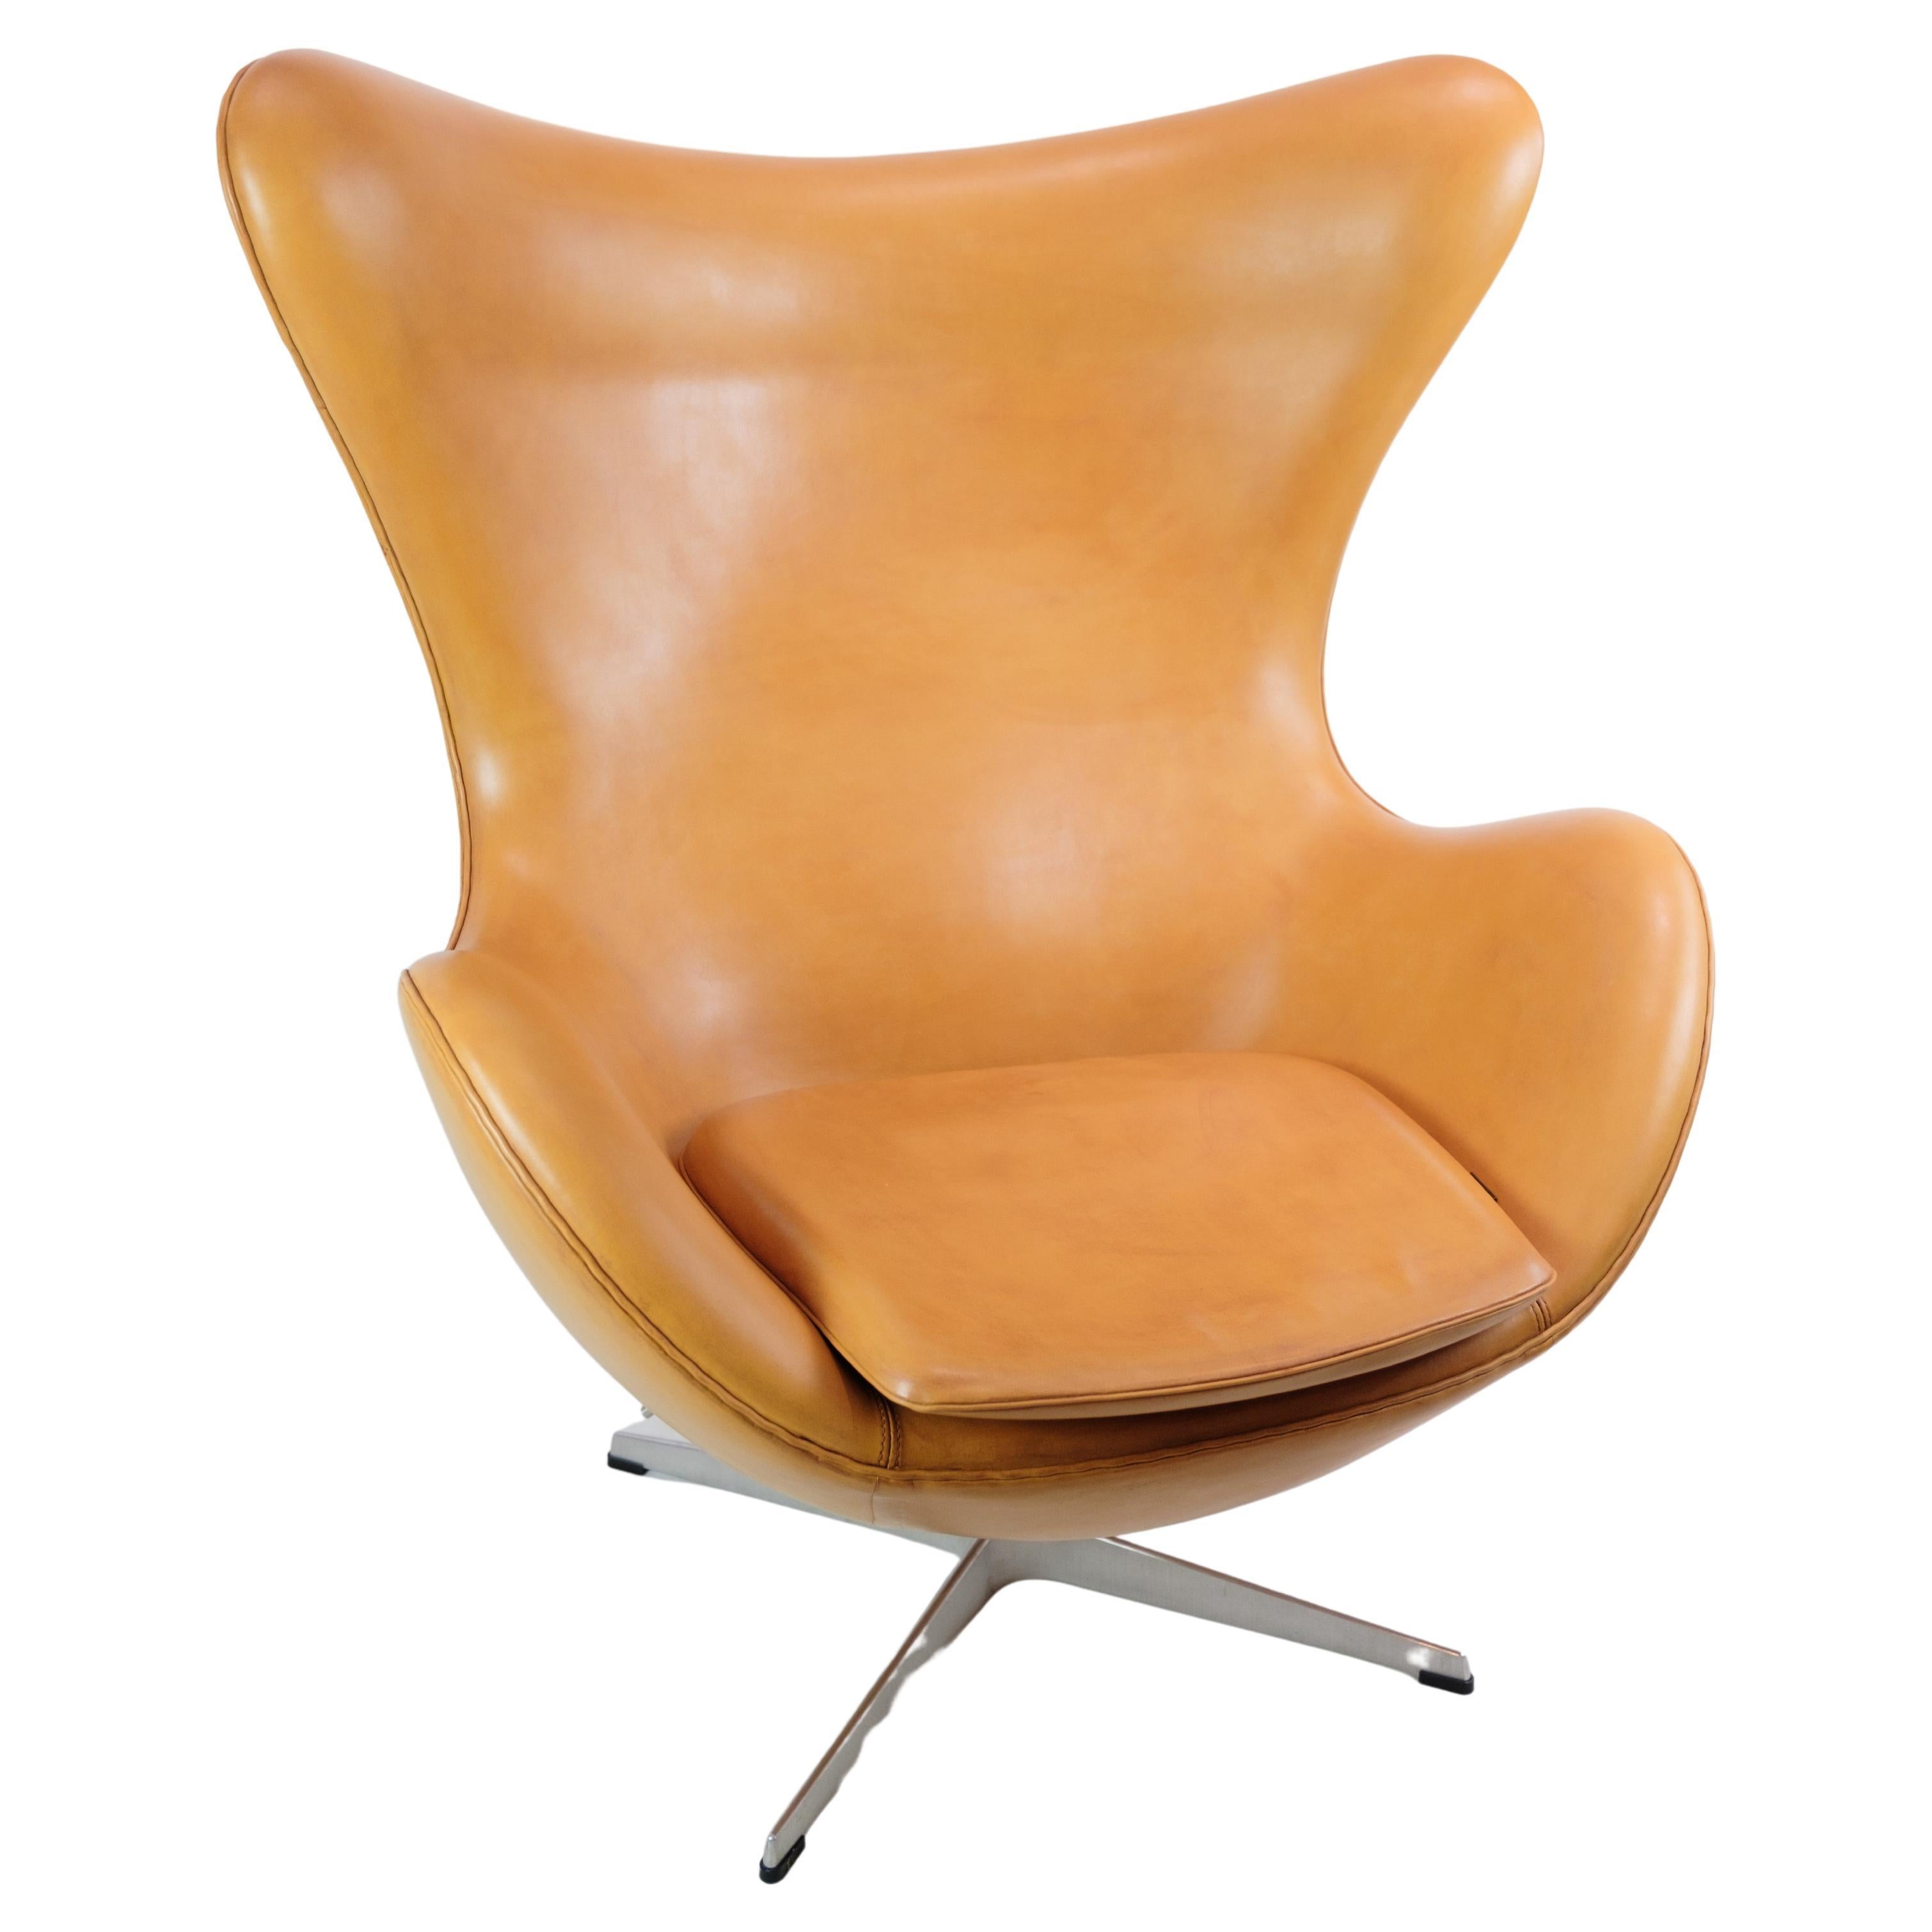 The Egg, model 3316, was designed by Arne Jacobsen in 1958 and manufactured by Fritz Hansen. This particular chair, made around 2000, features original upholstery in cognac elegance leather.

Arne Jacobsen, a prominent Danish architect and designer,